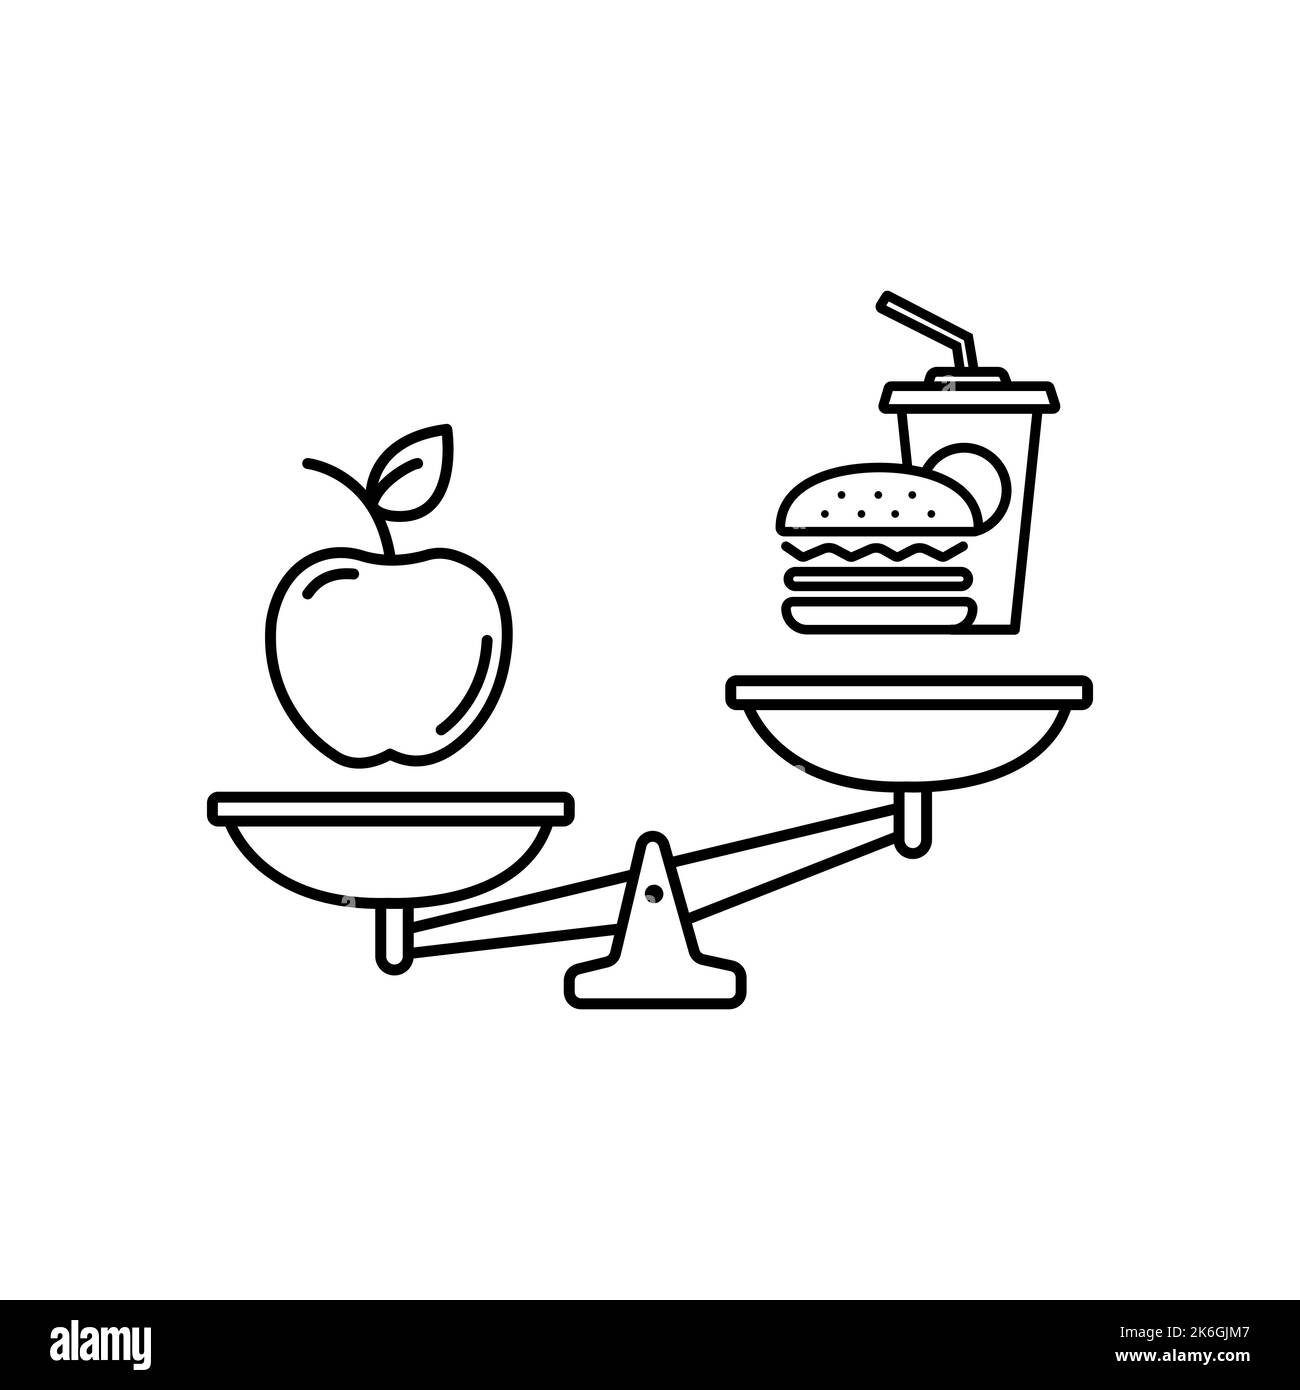 Premium Vector  Hamburger and apple on scales balance between fast and  healthy food diet nutrition fitness